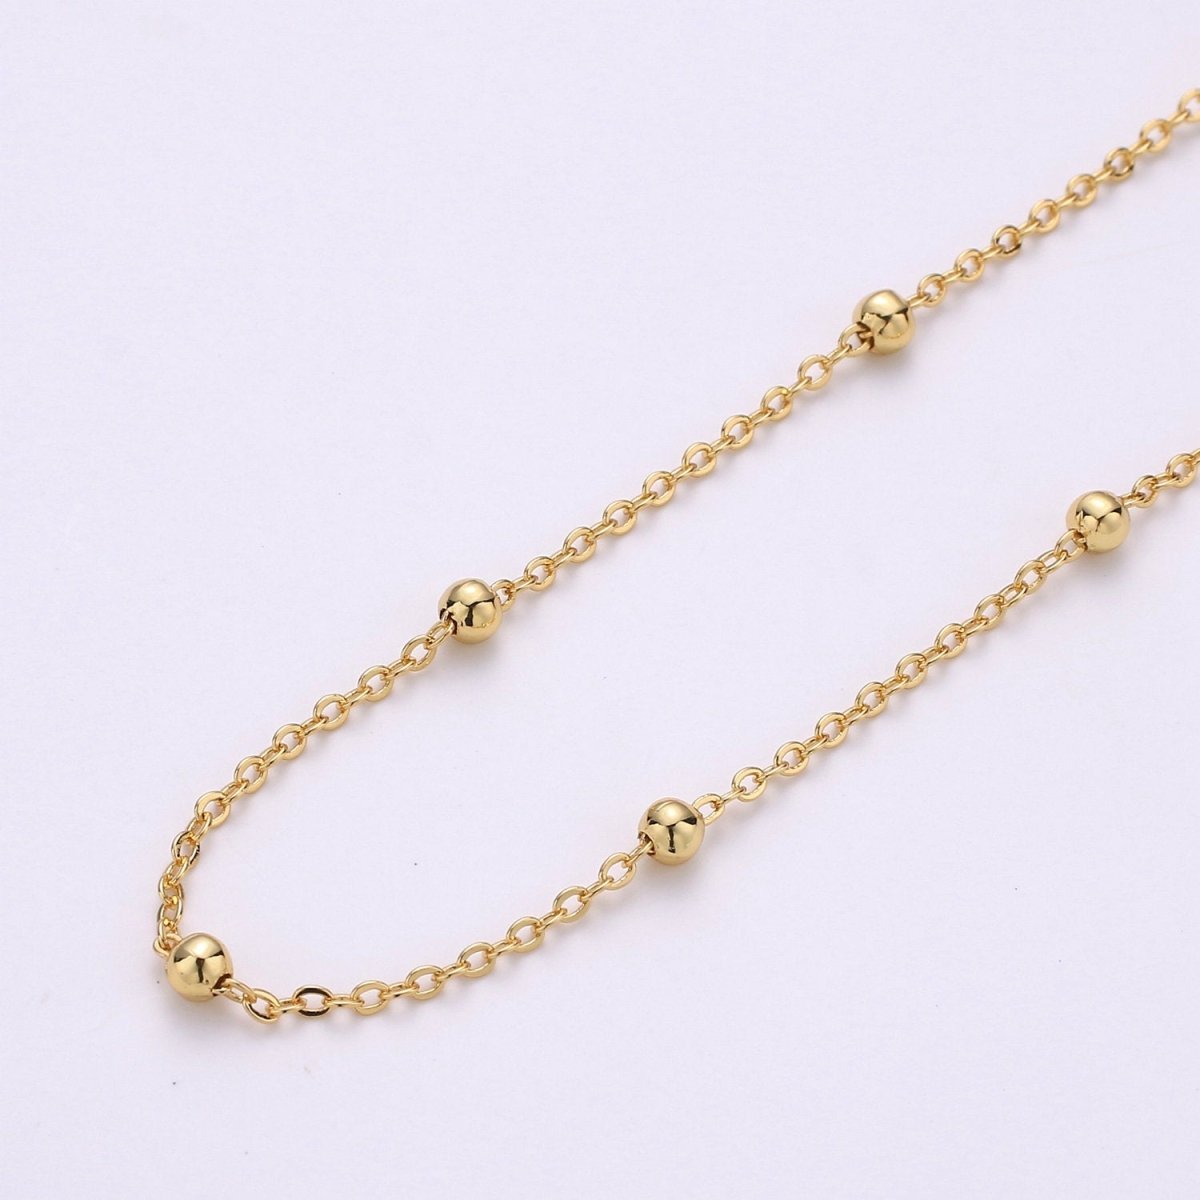 24K Gold Filled Satellite Chain - Gold Filled Beaded Chain - Satellite Chain by the Yard - BEAD Chain - Gold Rosary Chain | ROLL-139 - DLUXCA